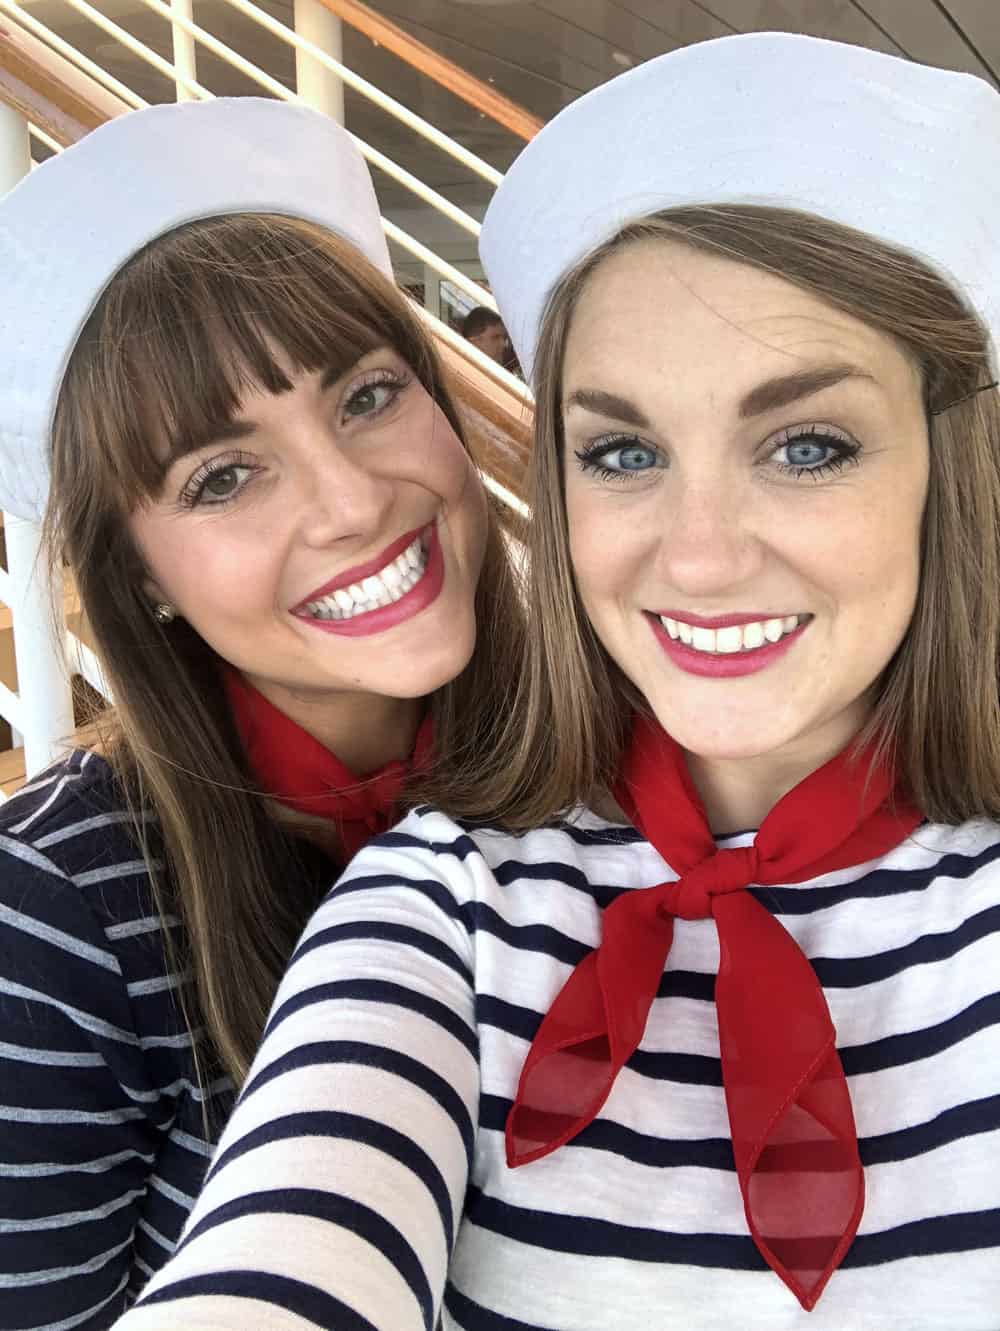 This easy diy sailor costume! Perfect for a group costume!